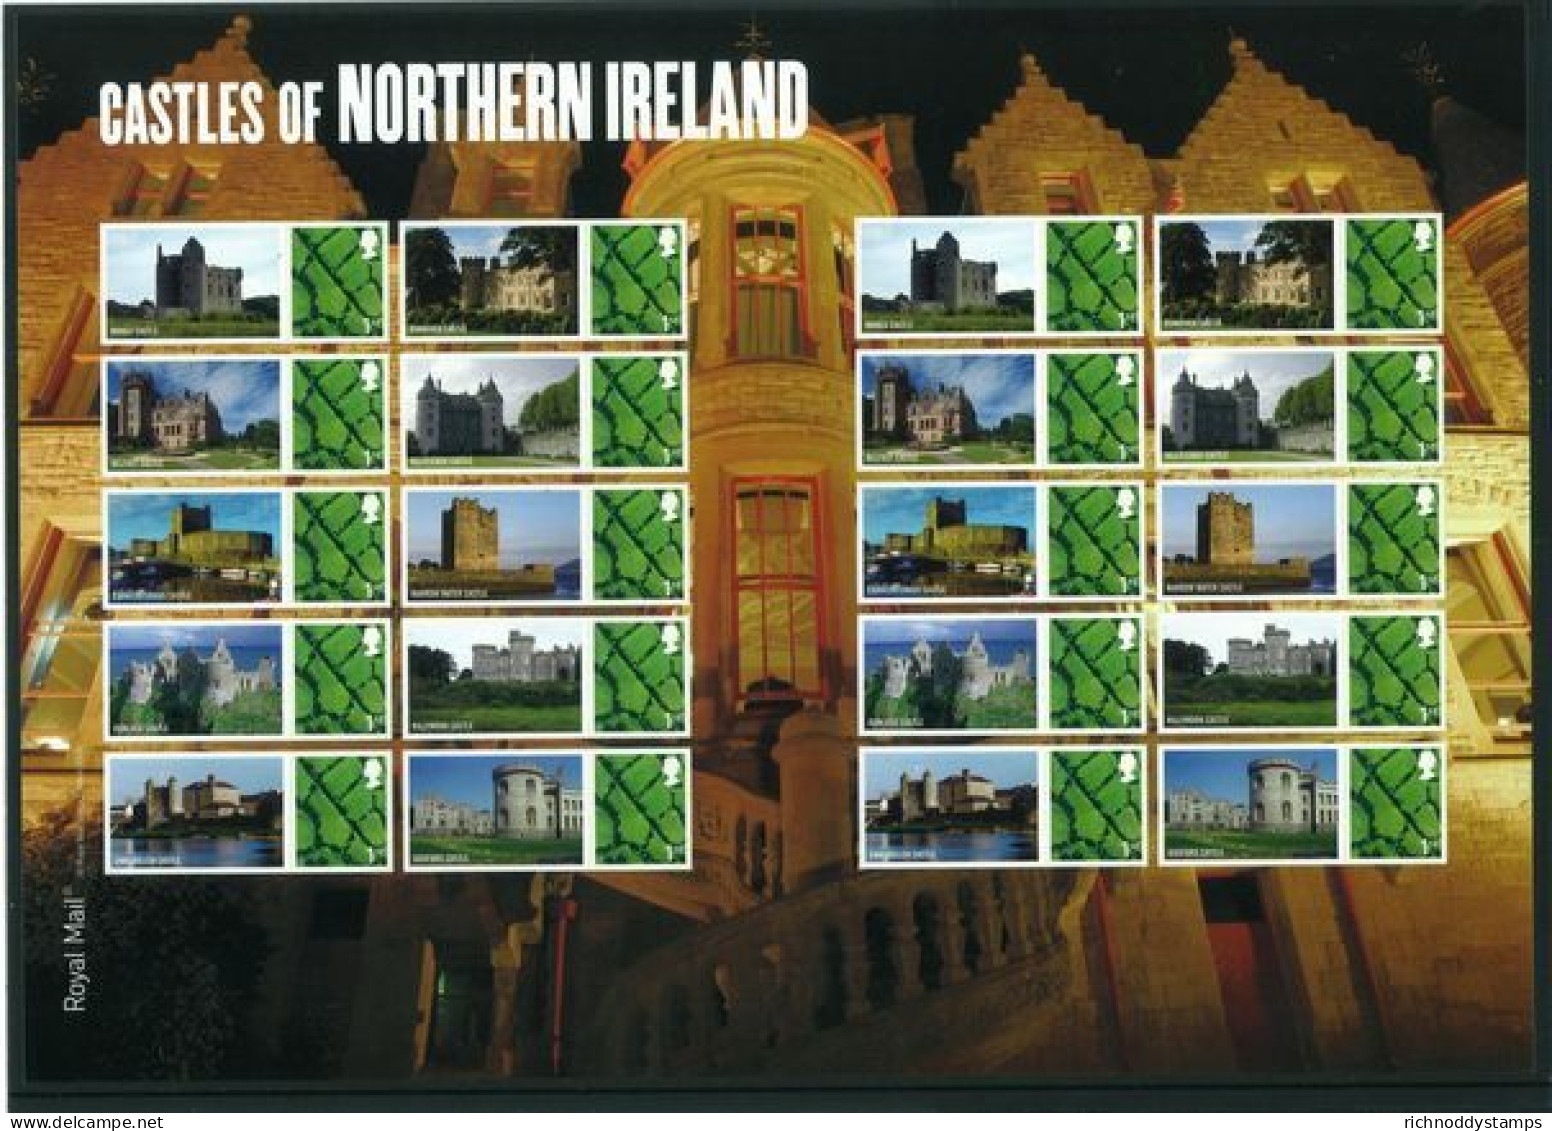 2009 Nothern Ireland Castles Patchwork Fields 1st Class Smilers Unmounted Mint.  - Timbres Personnalisés